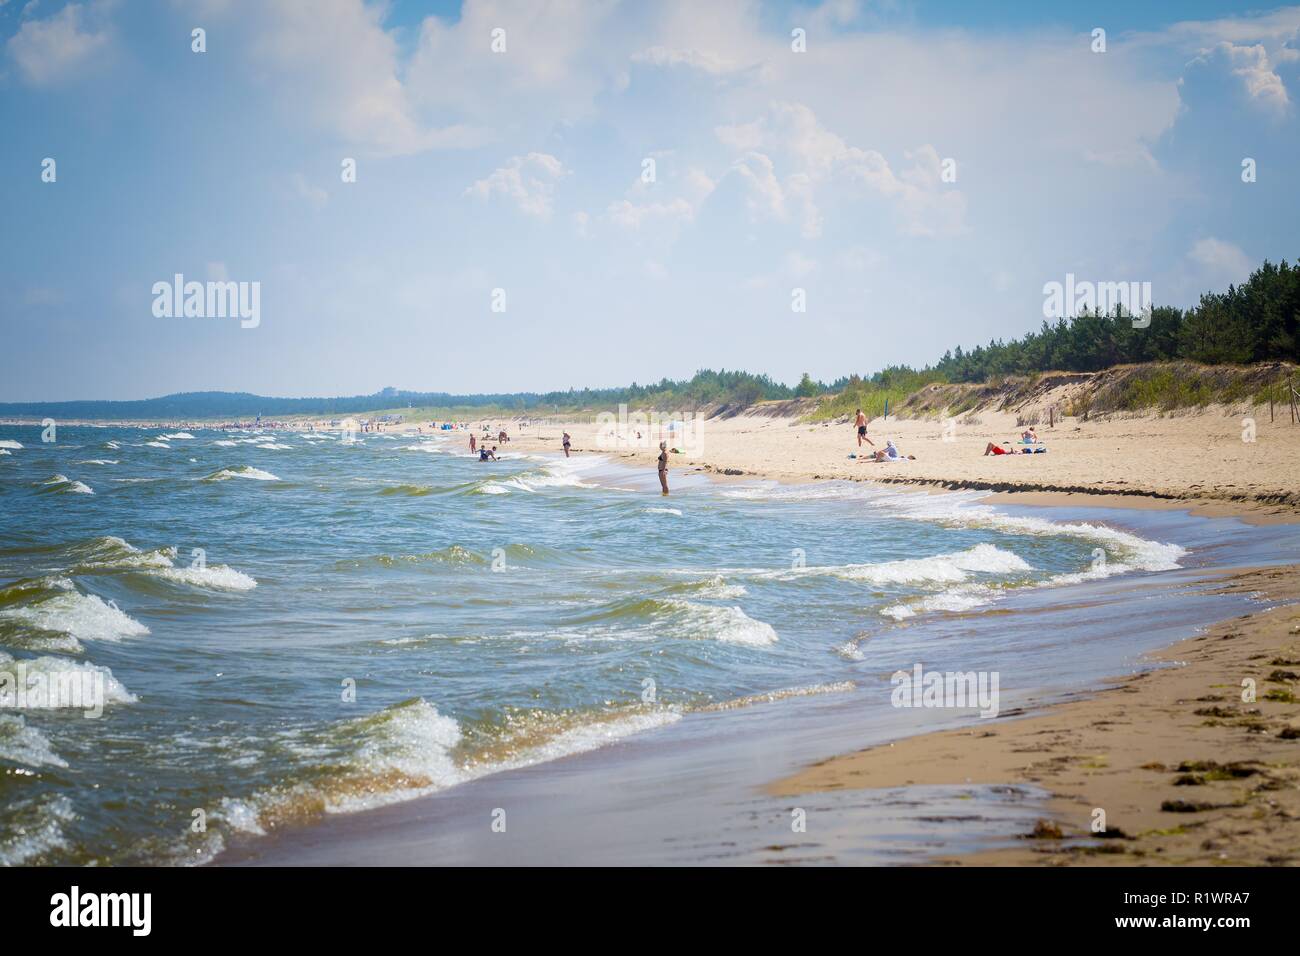 Summer on polish beach, tourists silhouettes on sea shore. Vacations in Poland. Stock Photo